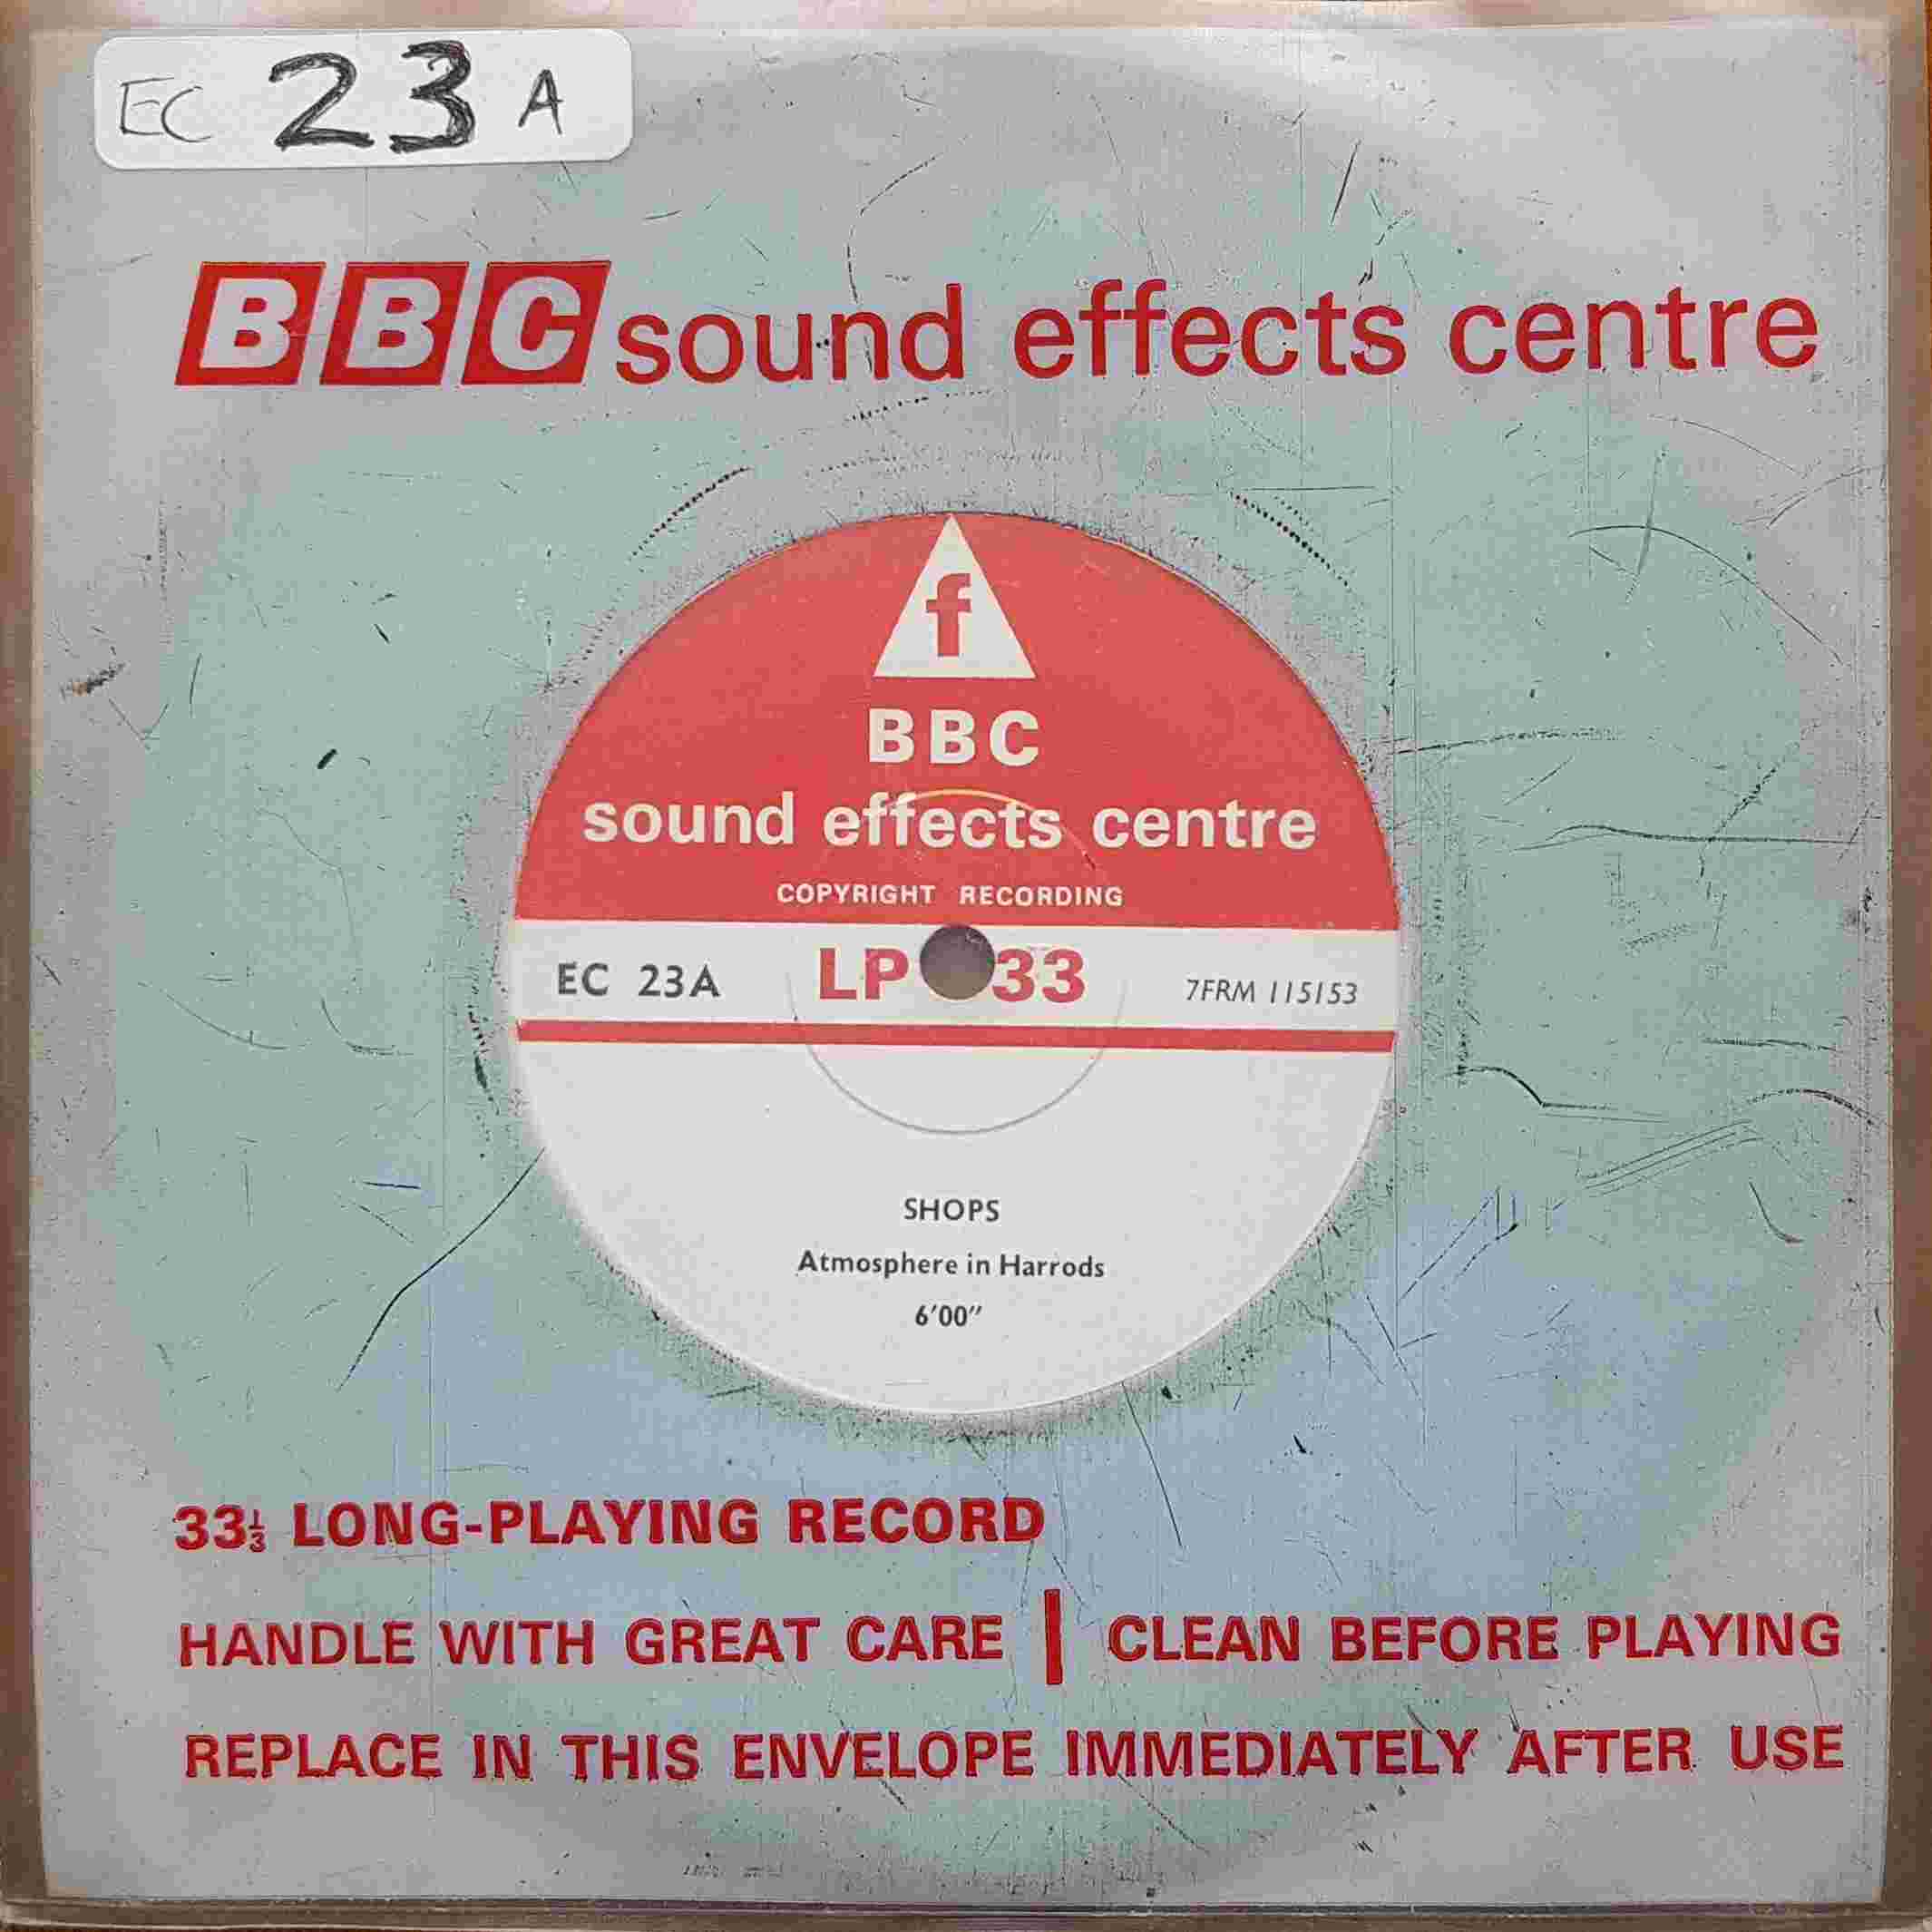 Picture of EC 23A Shops by artist Not registered from the BBC records and Tapes library